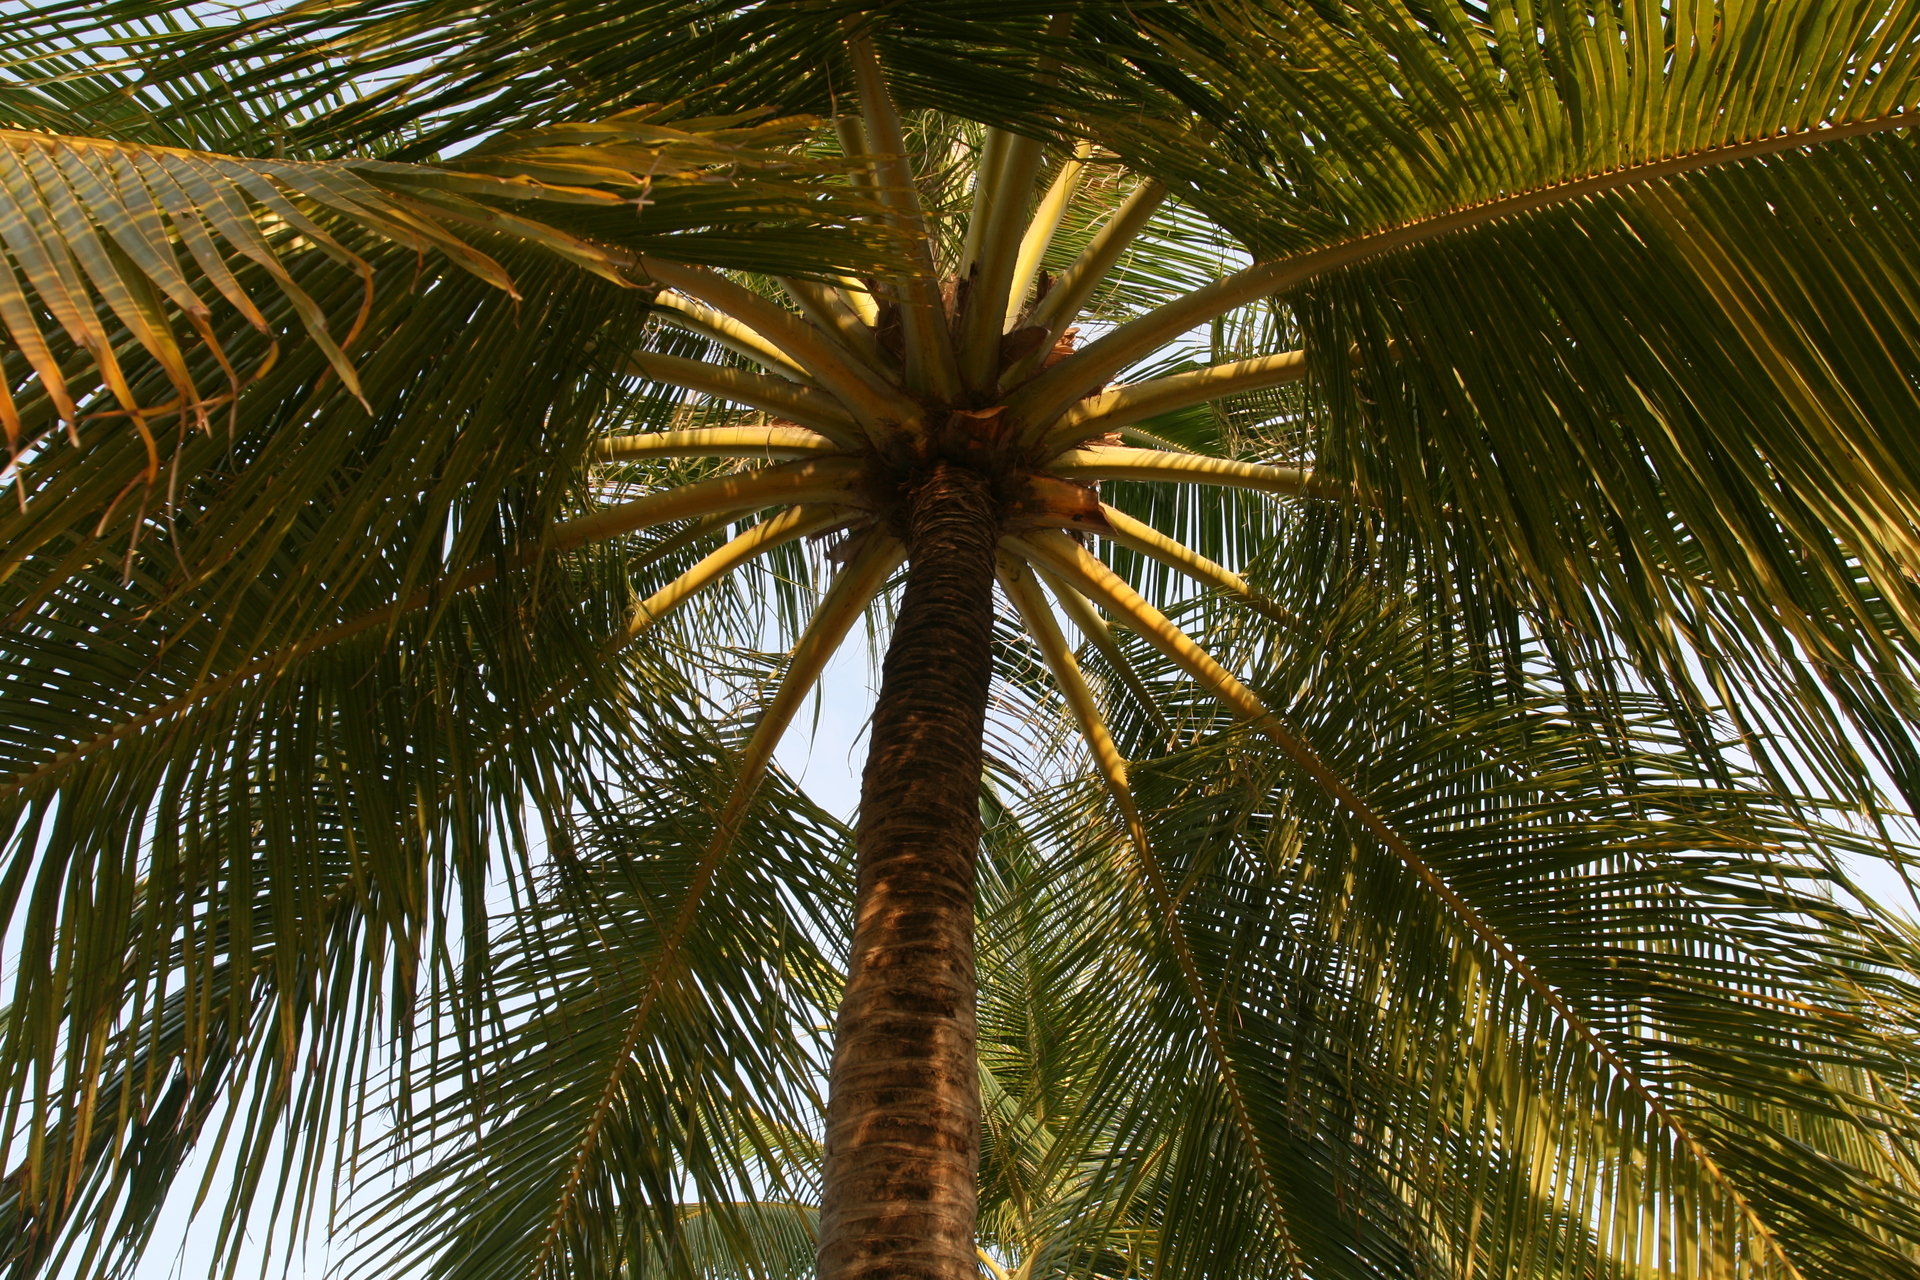 Foap.com: Low angle view of palm tree stock photo by jerry32